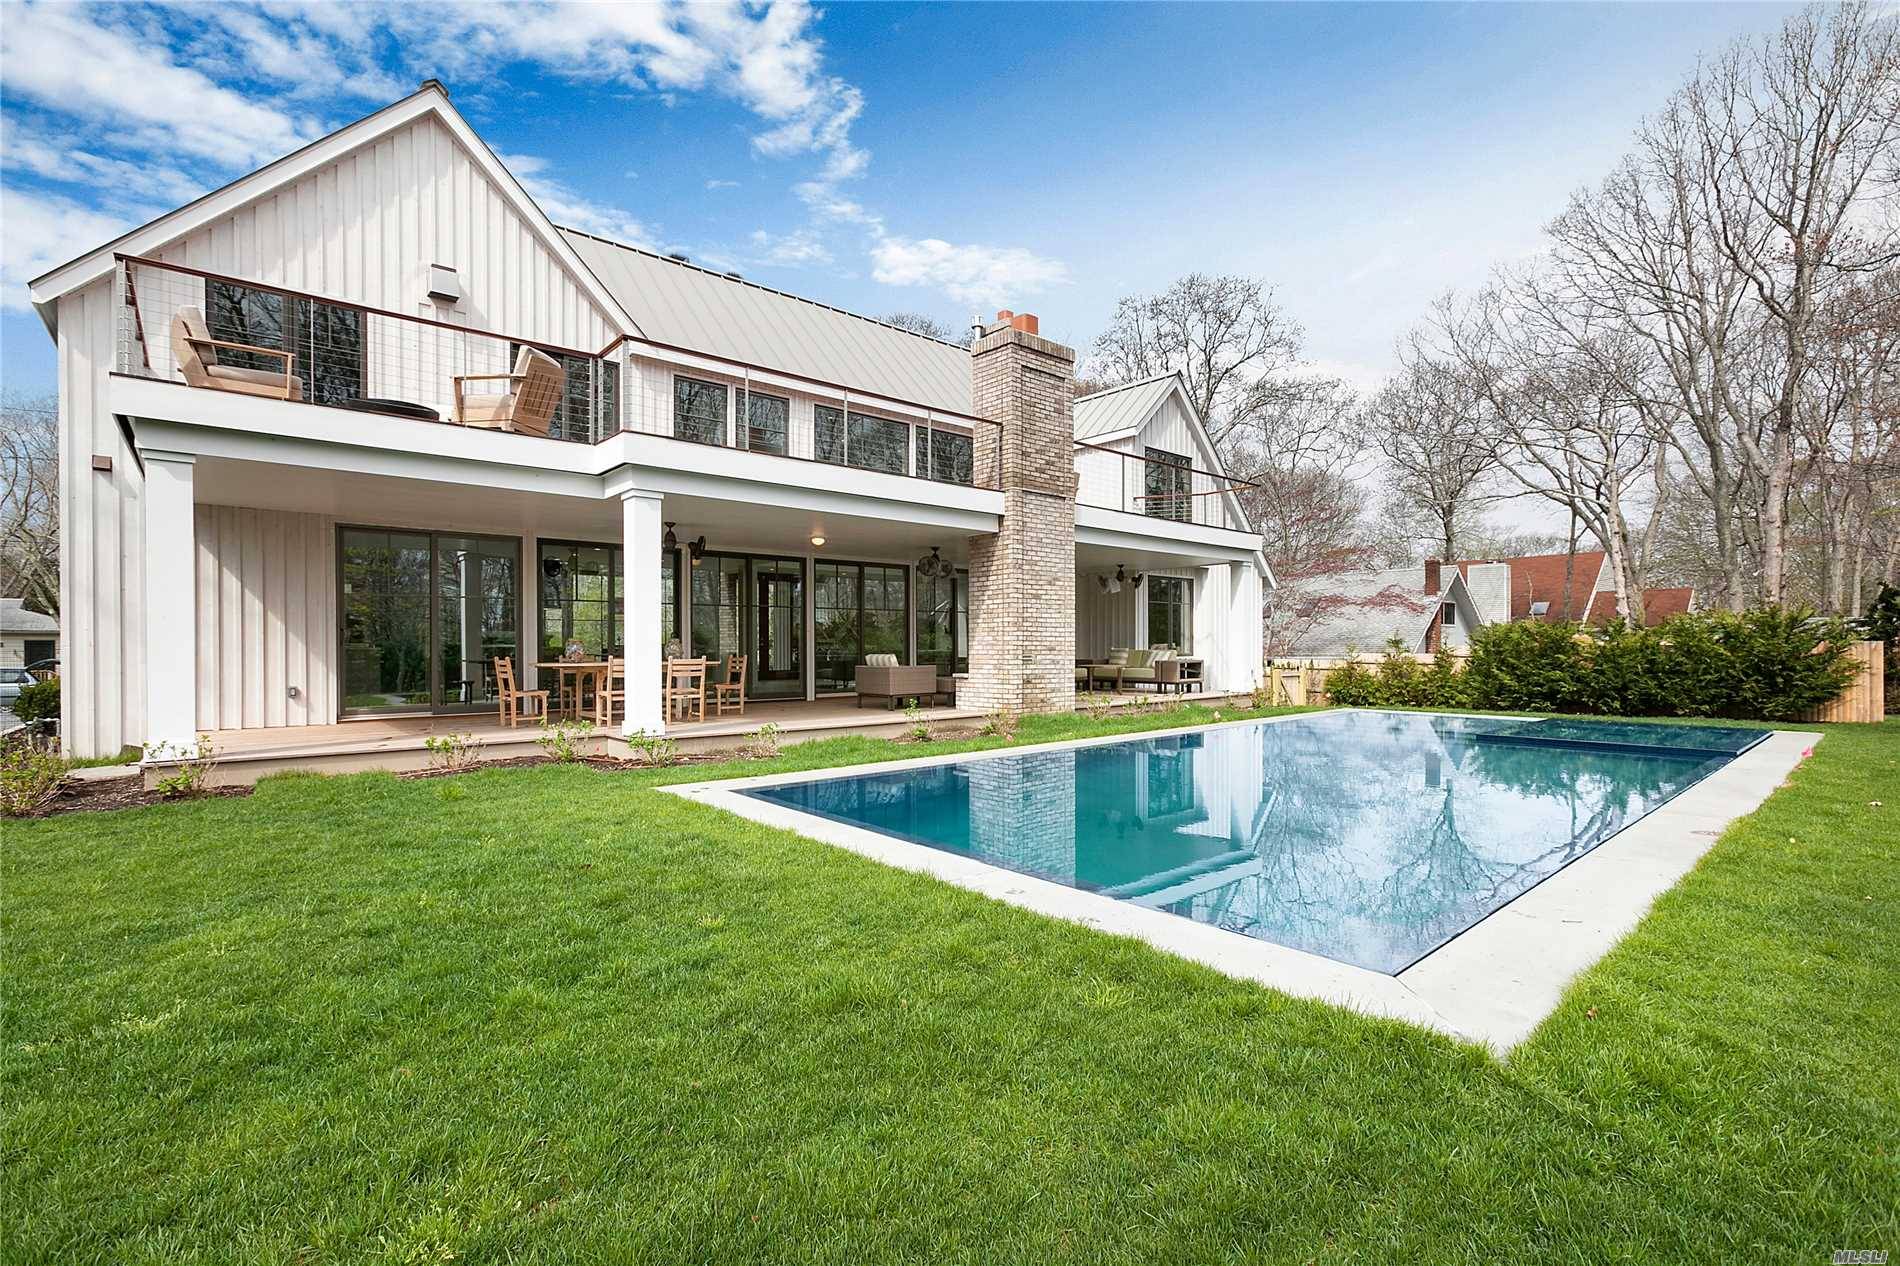 In the historic Sag Harbor Hills neighborhood, within the village of Sag Harbor, this brand new 3, 800 sqft luxury residence is a quick stroll to Havens Beach and the ...